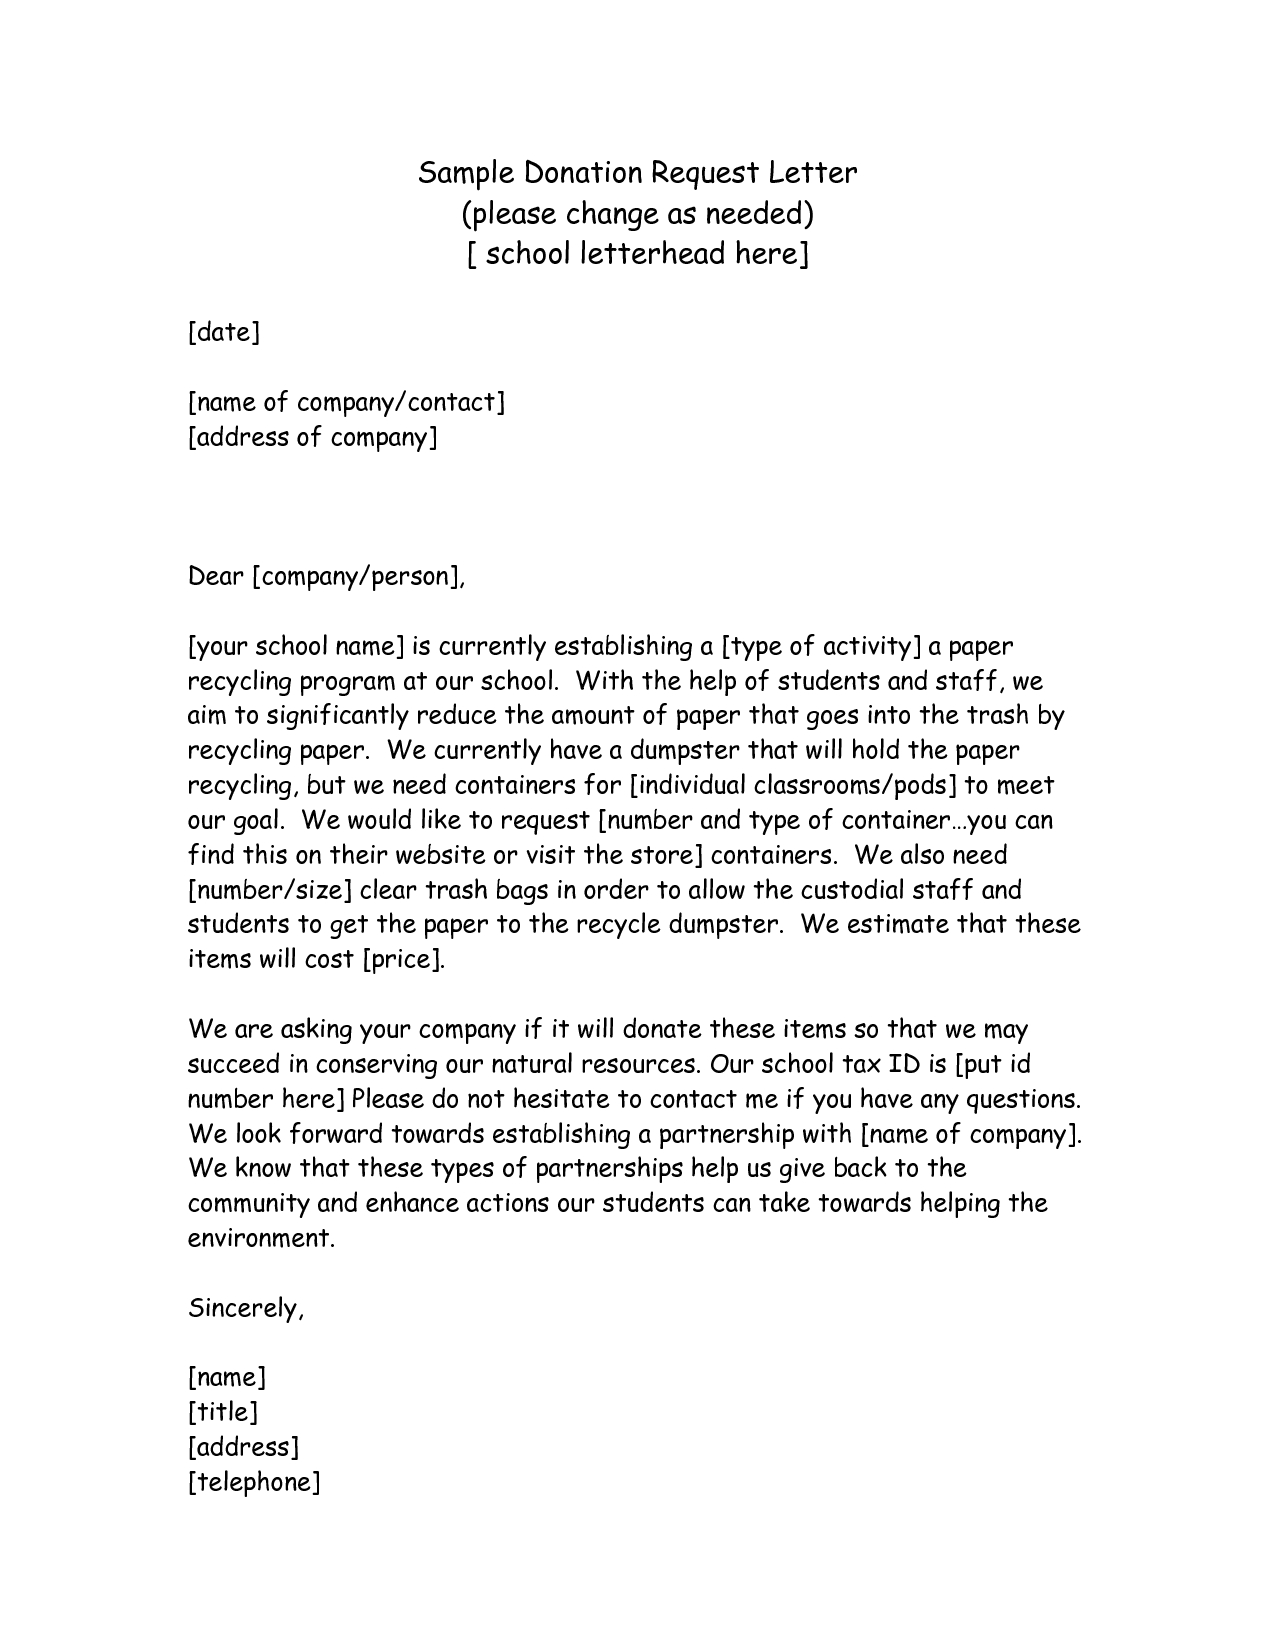 Request for Donations Letter Template Free - Examples for Donation Letters